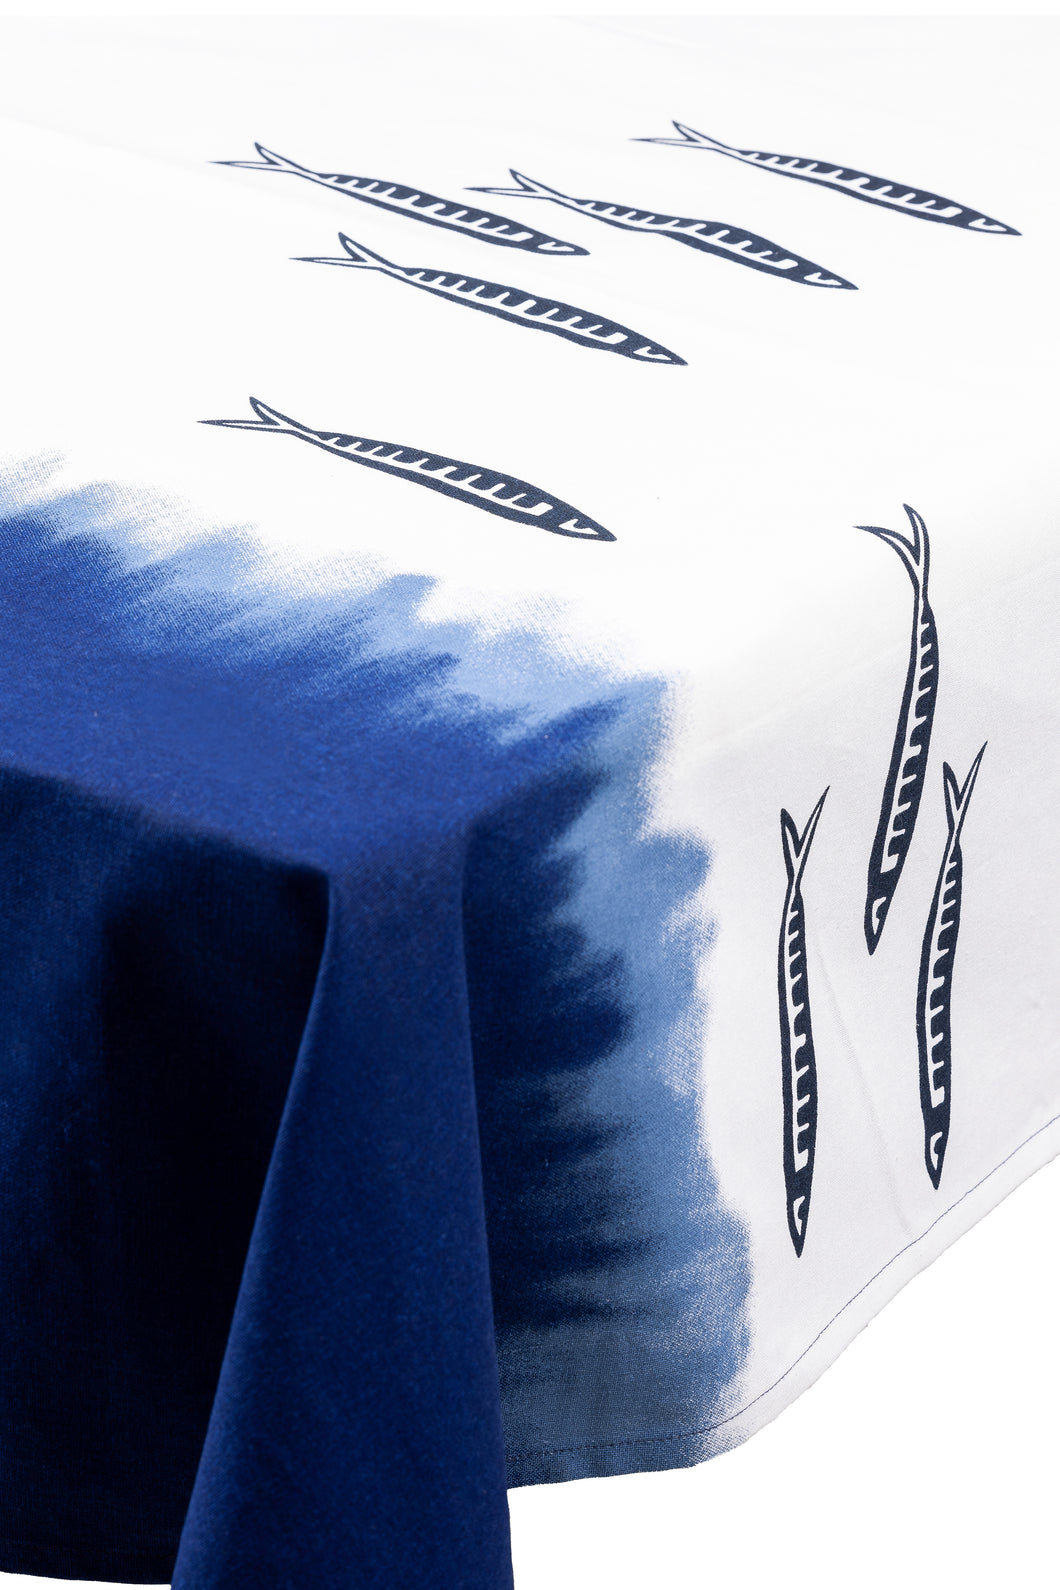 Large Fishes Dip Dye Blue and White Tablecloth by Shoeless Joe